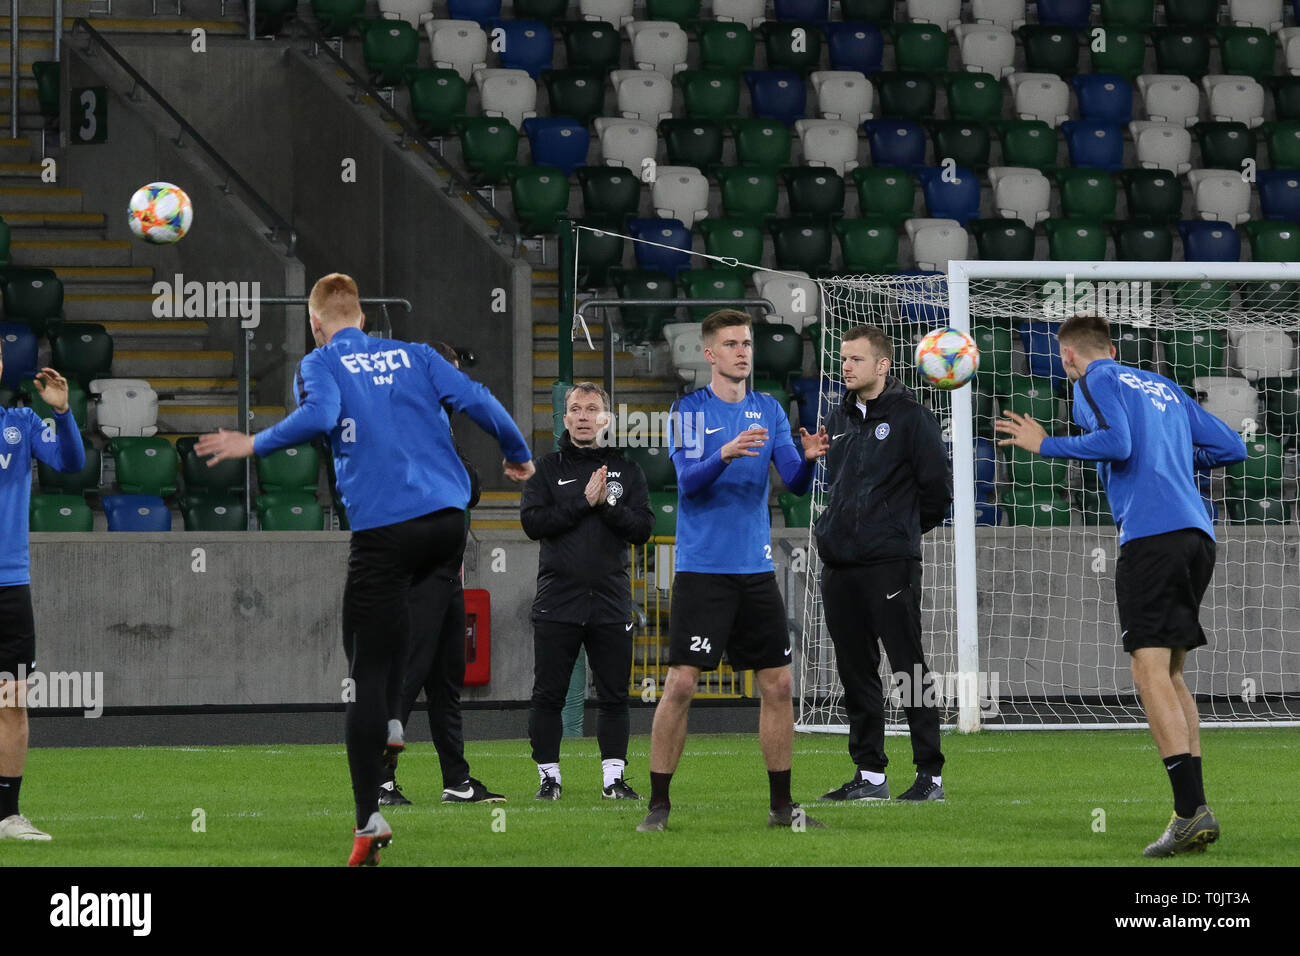 Windsor Park Belfast, Northern Ireland, UK. 20 March 2019. The Estonia squad train at Windsor Park before their opening game against Northern Ireland tomorrow night. Estonia head coach Martin Reim at the session. Credit: David Hunter/Alamy Live News. Stock Photo